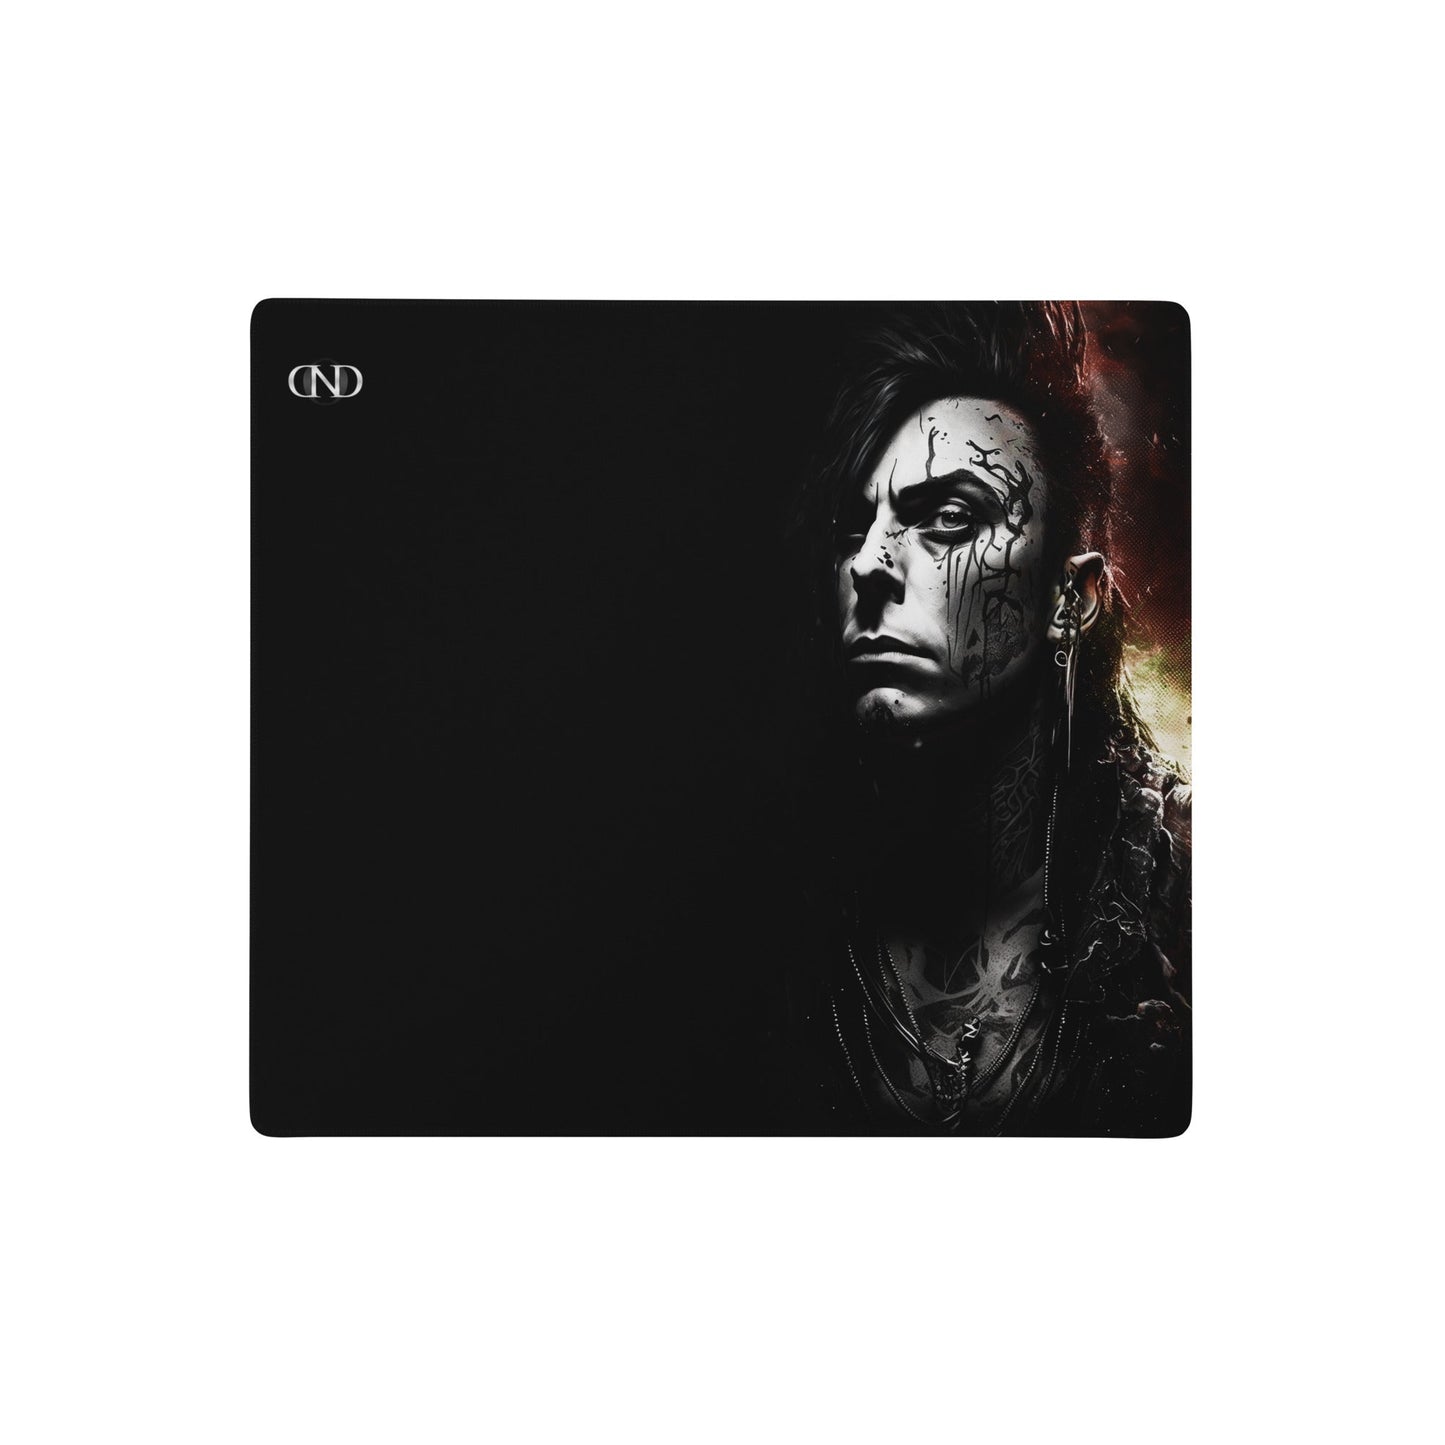 2 Ronnie Noir XXL Gaming Mouse Pad by Neduz Designs